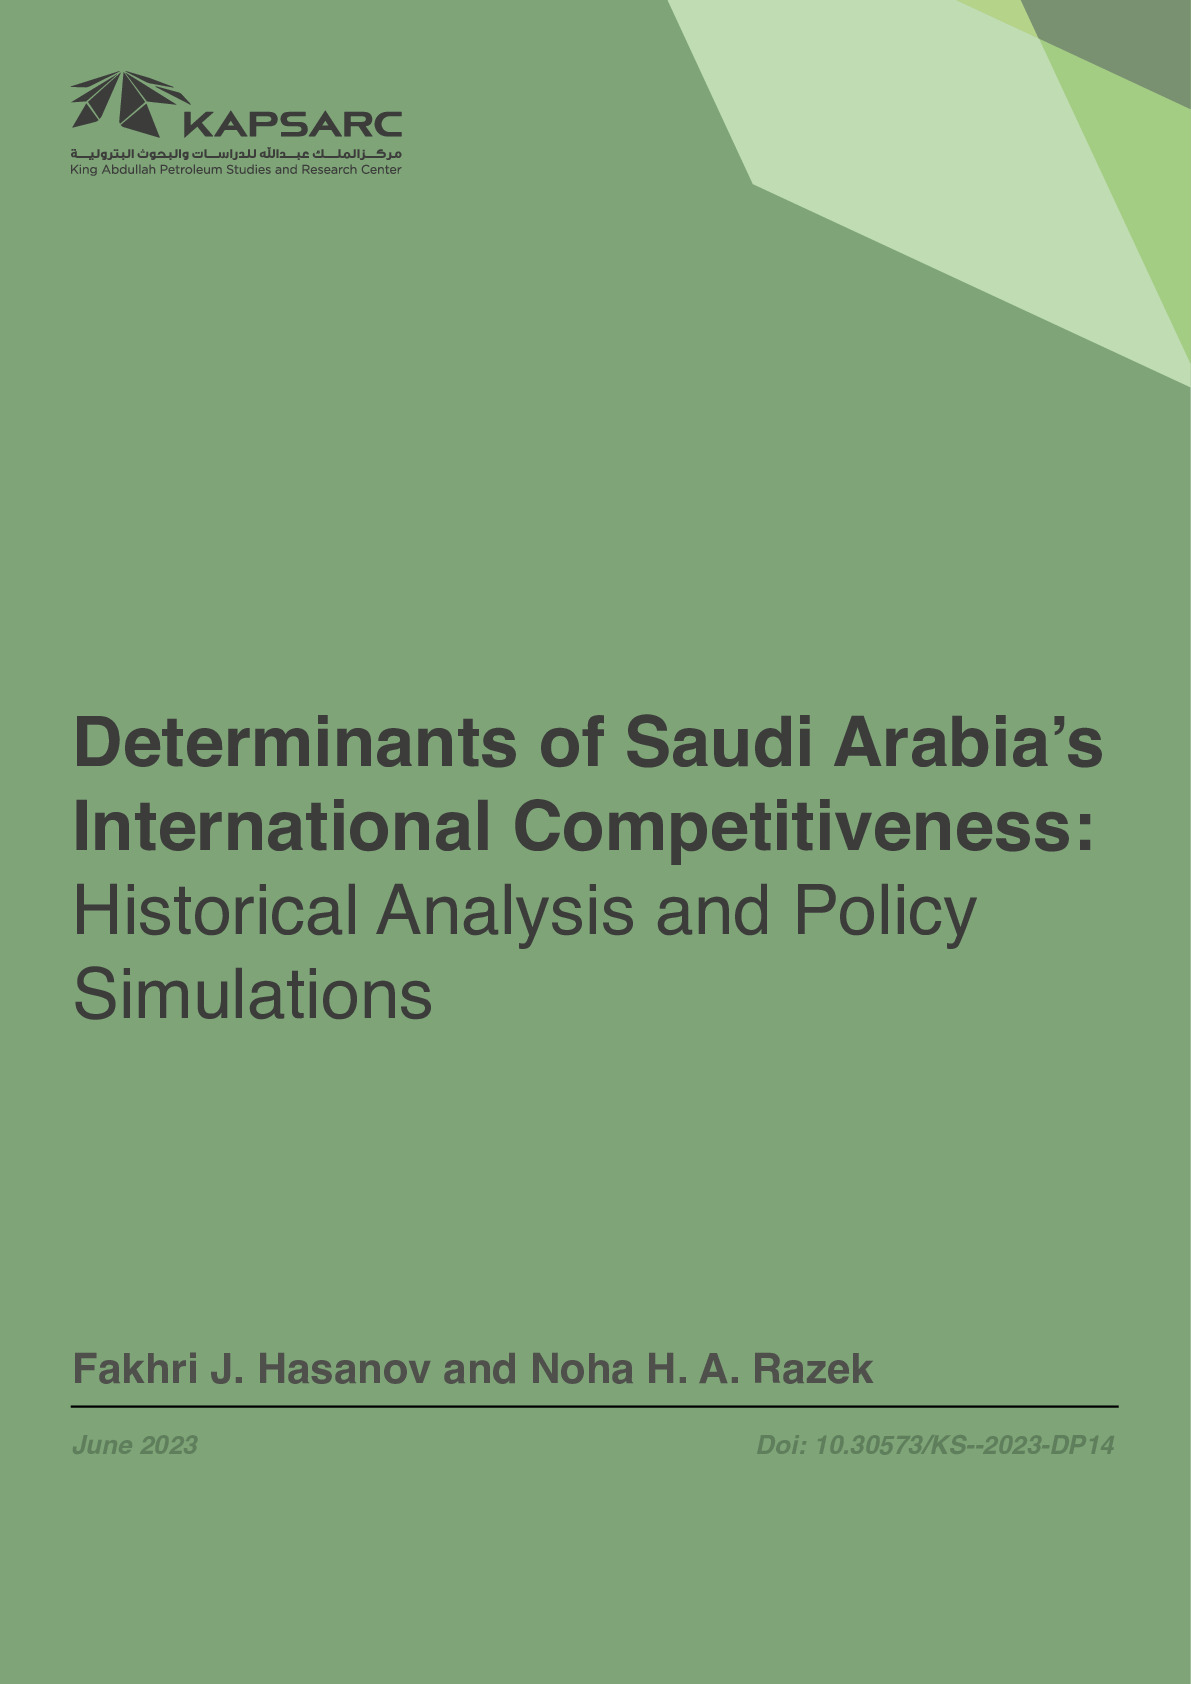 Determinants of Saudi Arabia’s International Competitiveness: Historical Analysis and Policy Simulations